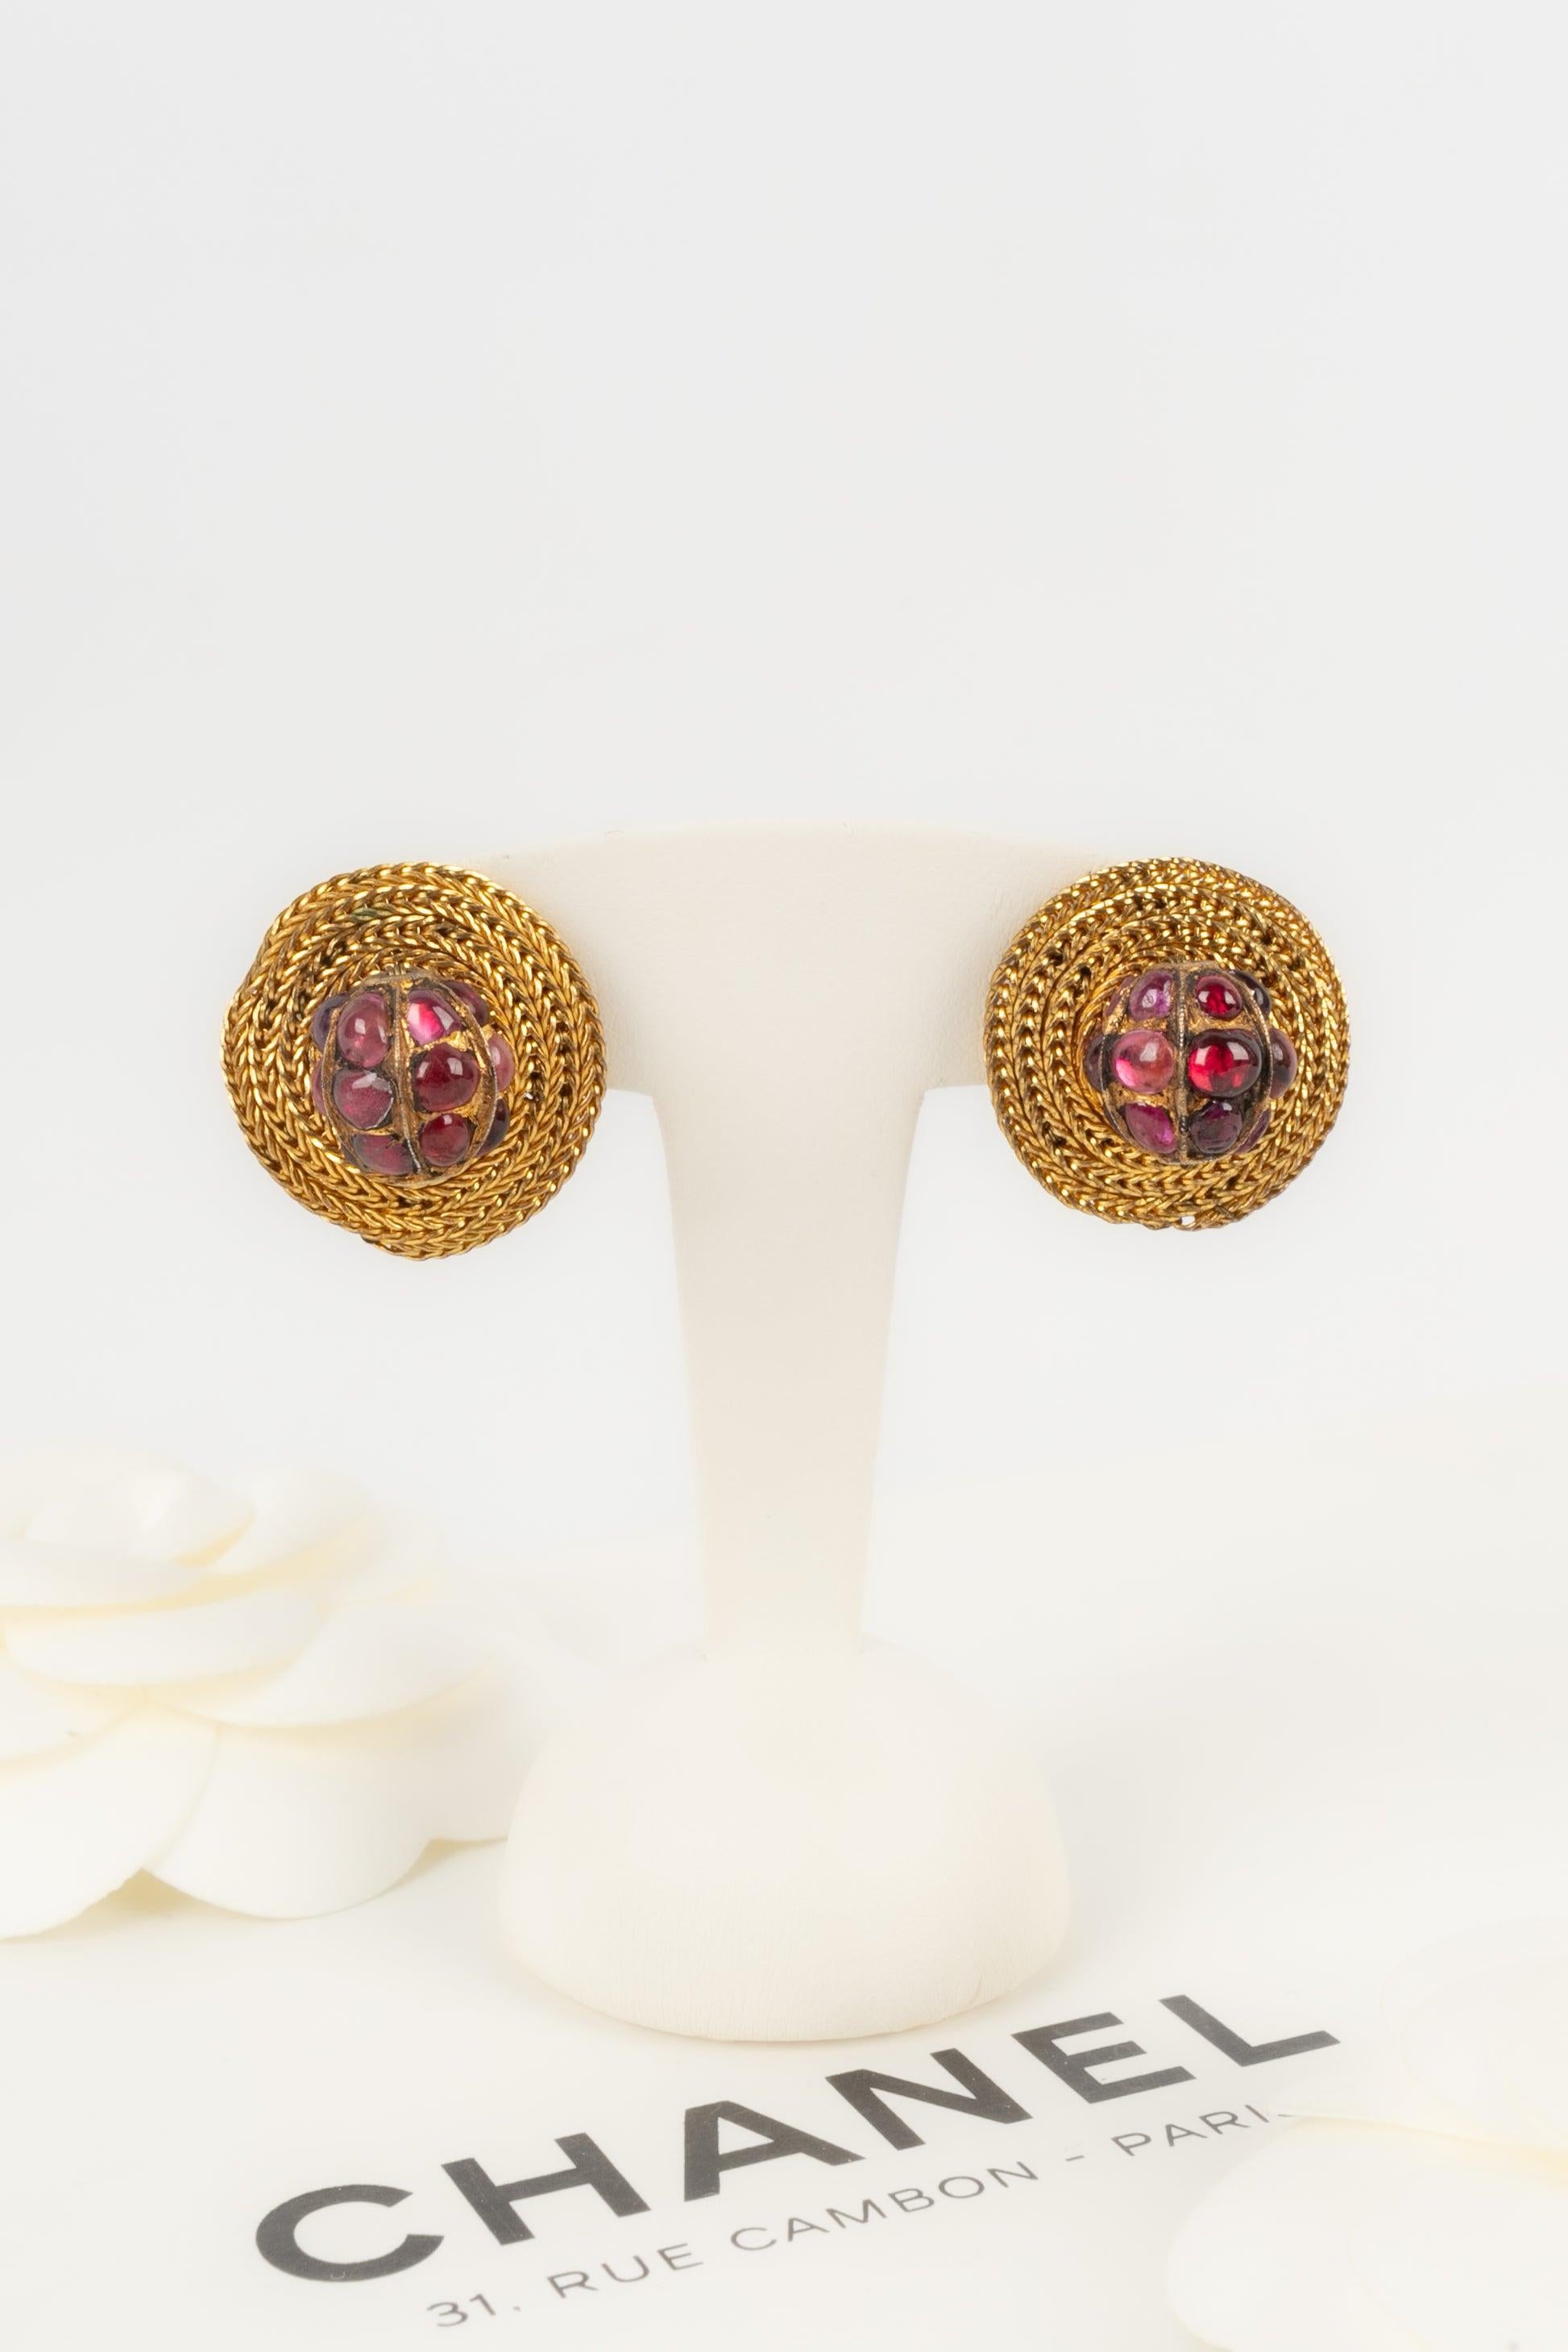 Chanel Clip-on Earrings with Central Costume Pearls by Rousselet For Sale 2